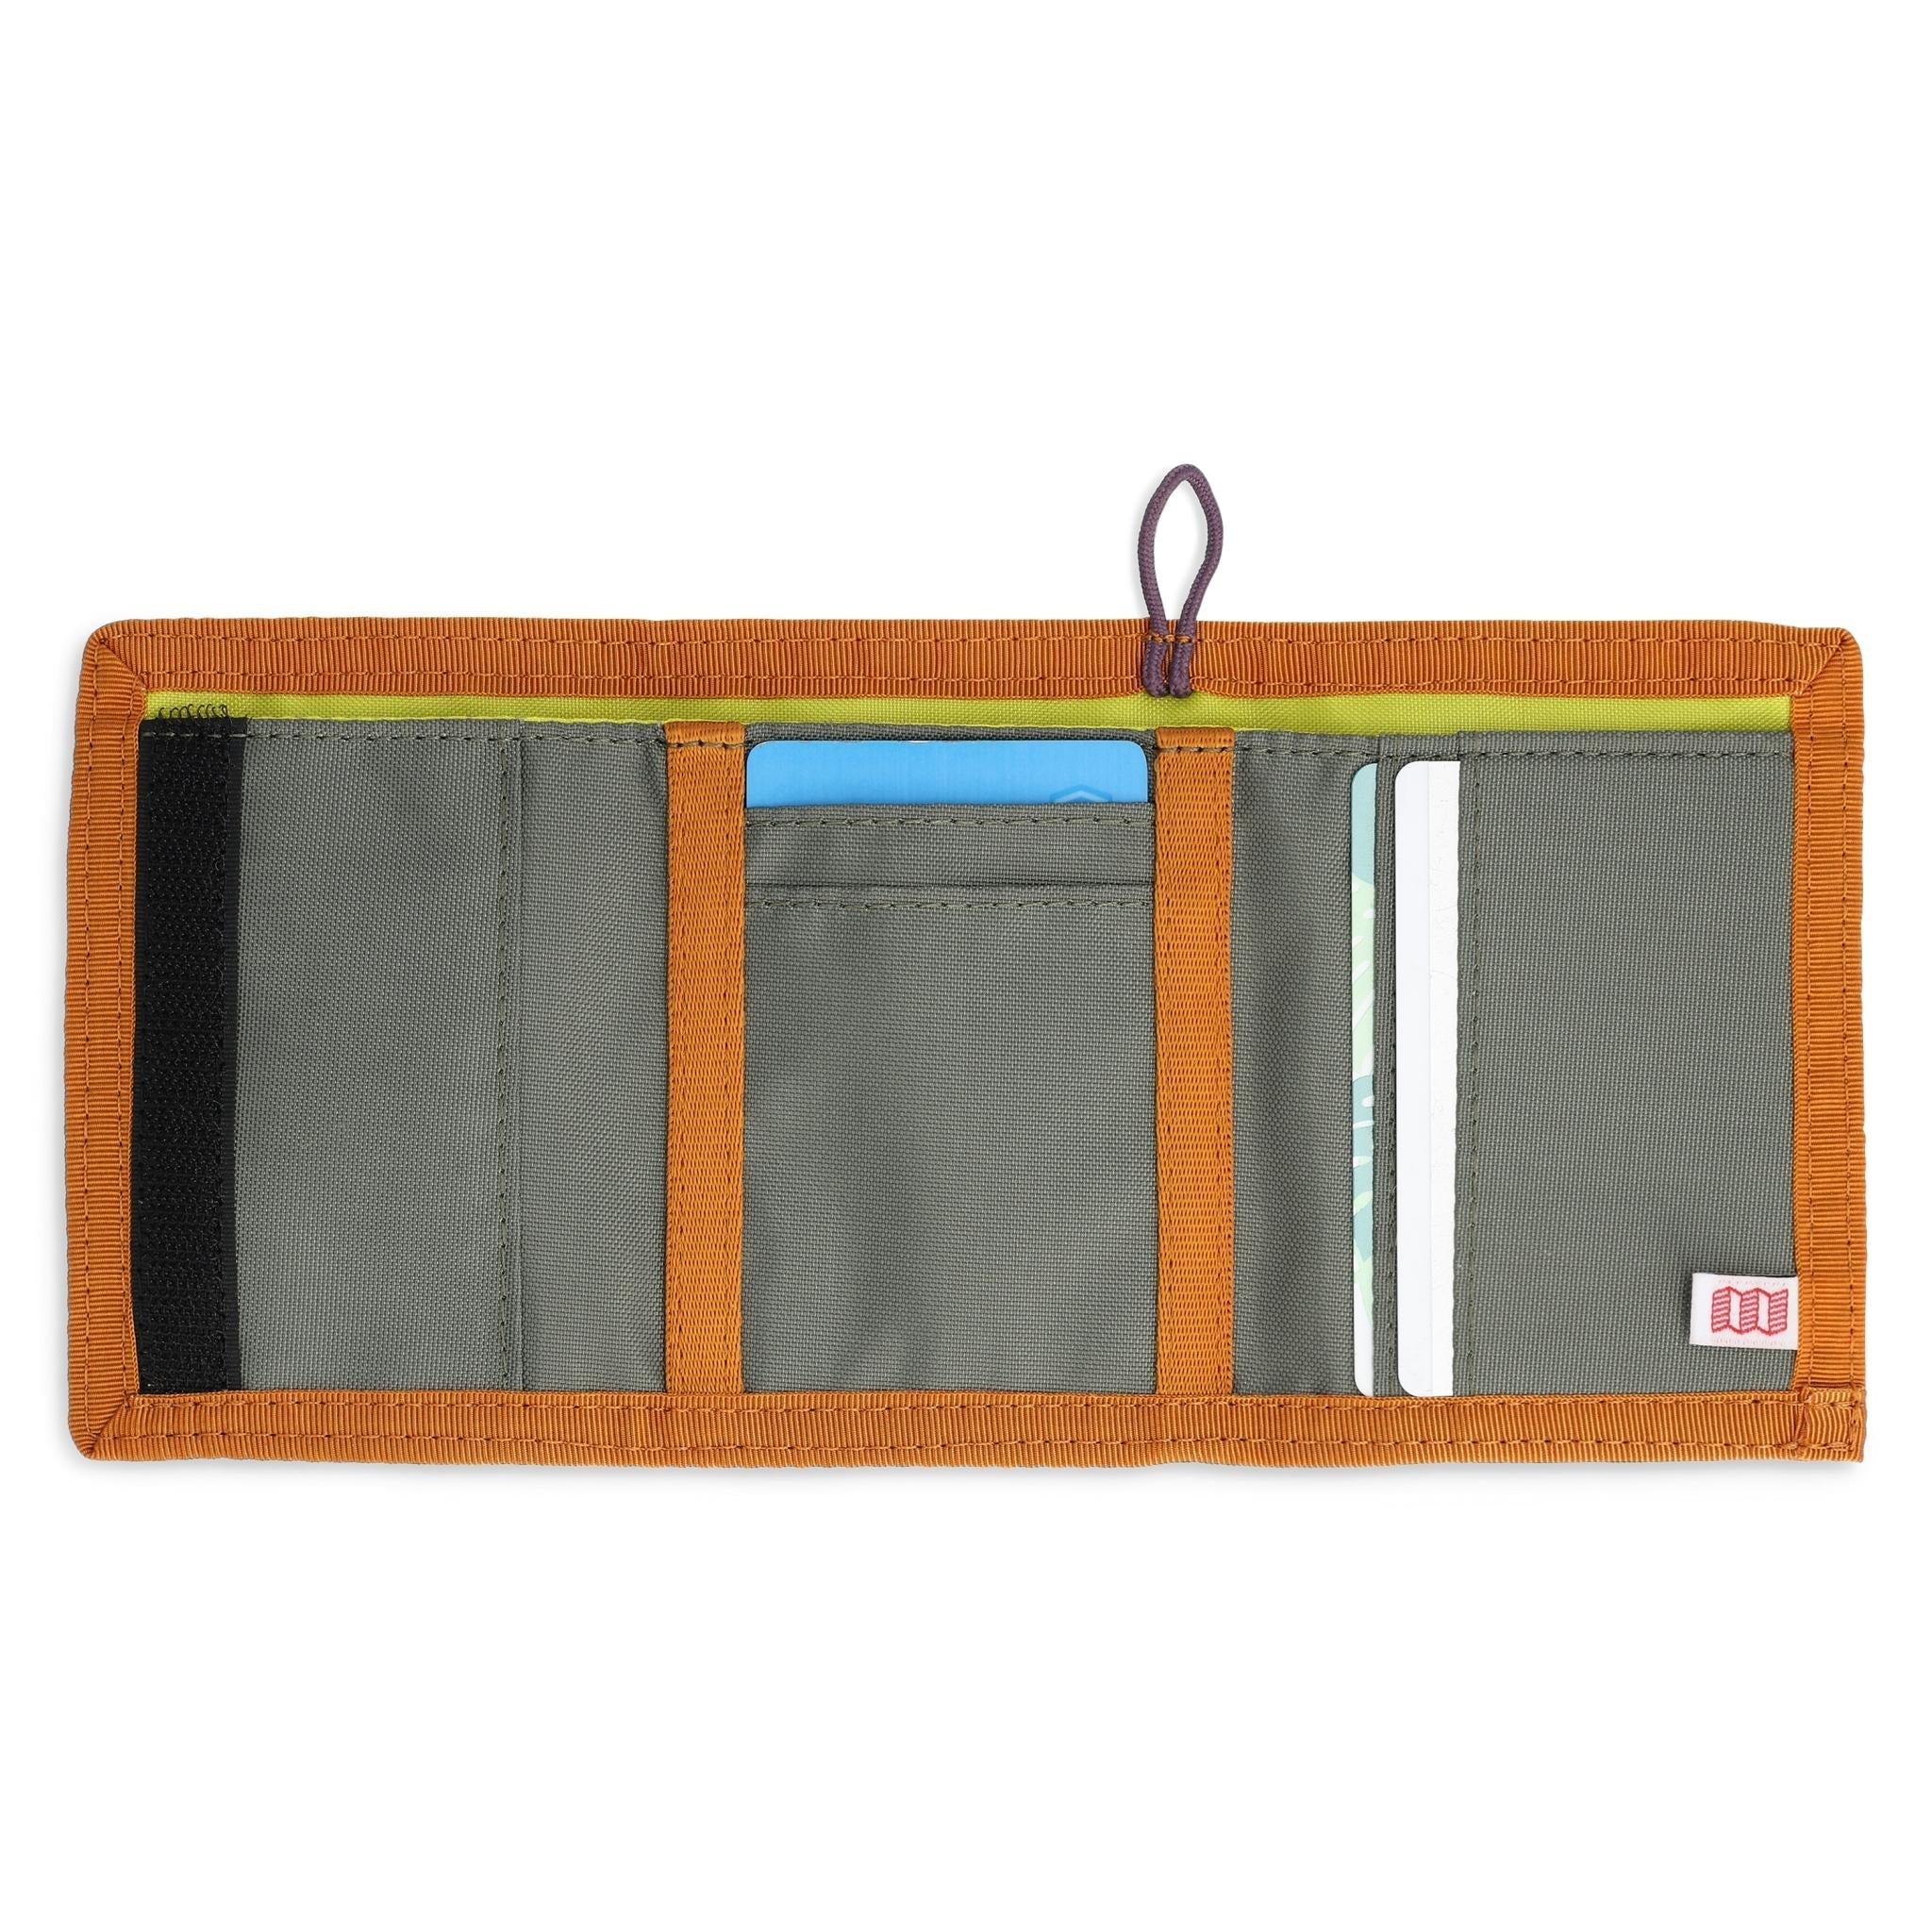 Front View of Topo Designs Tri-Fold Wallet in "Beetle"